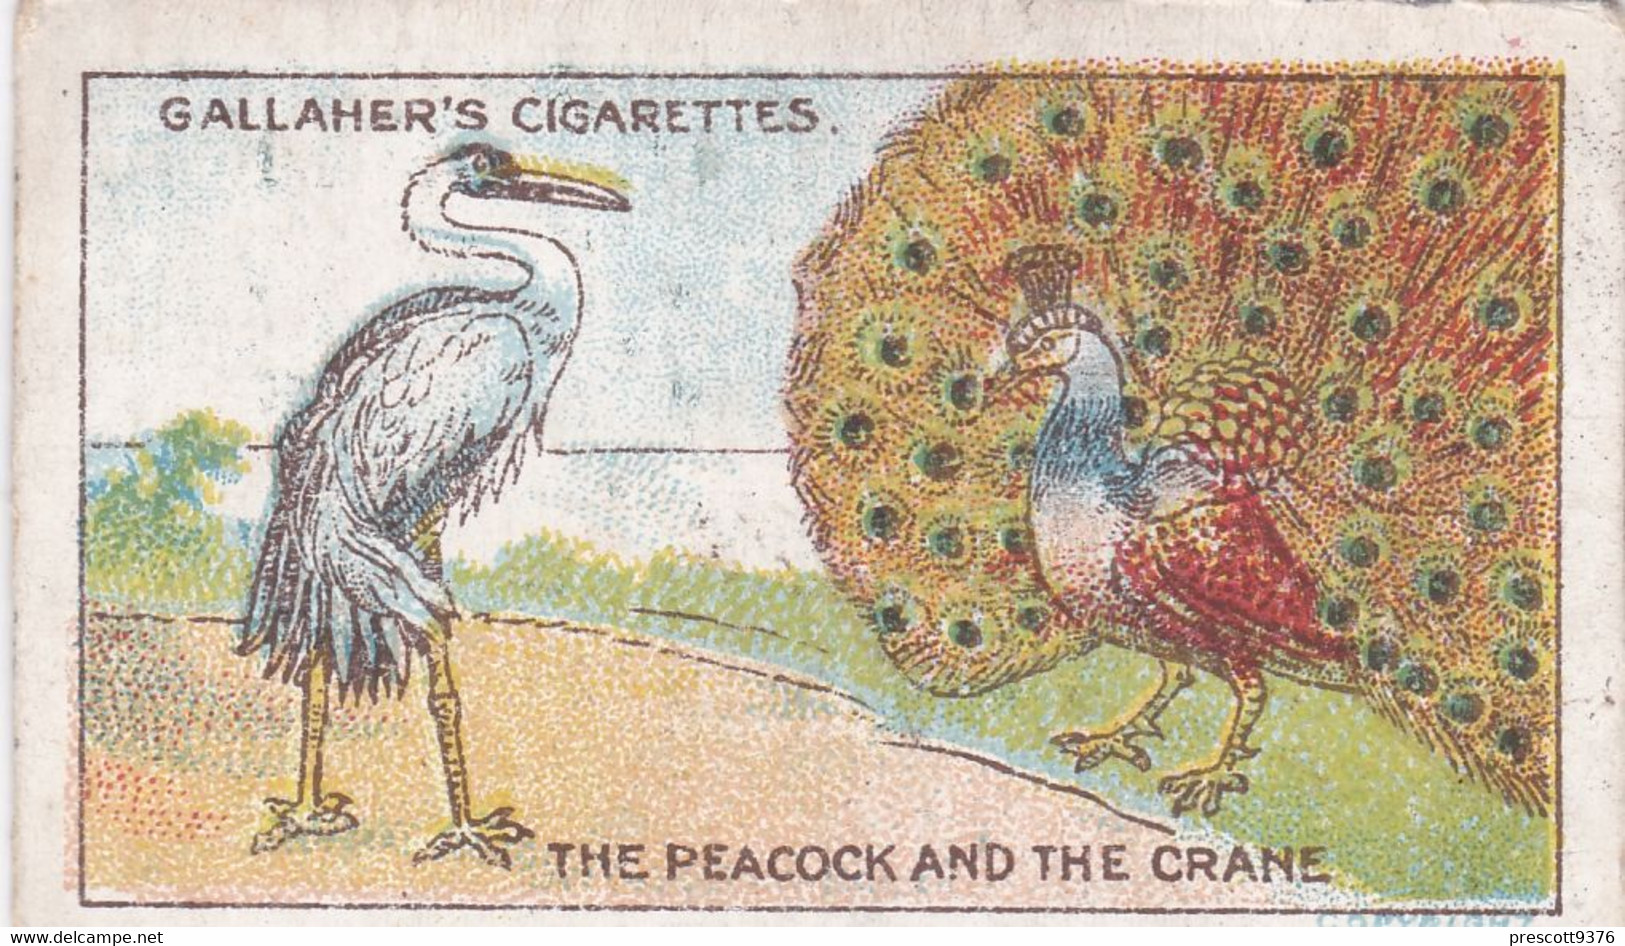 51 The Peacock & The Crane, Fables & Their Morals 1922  - Gallaher Cigarette Card - Original - Antique - Gallaher